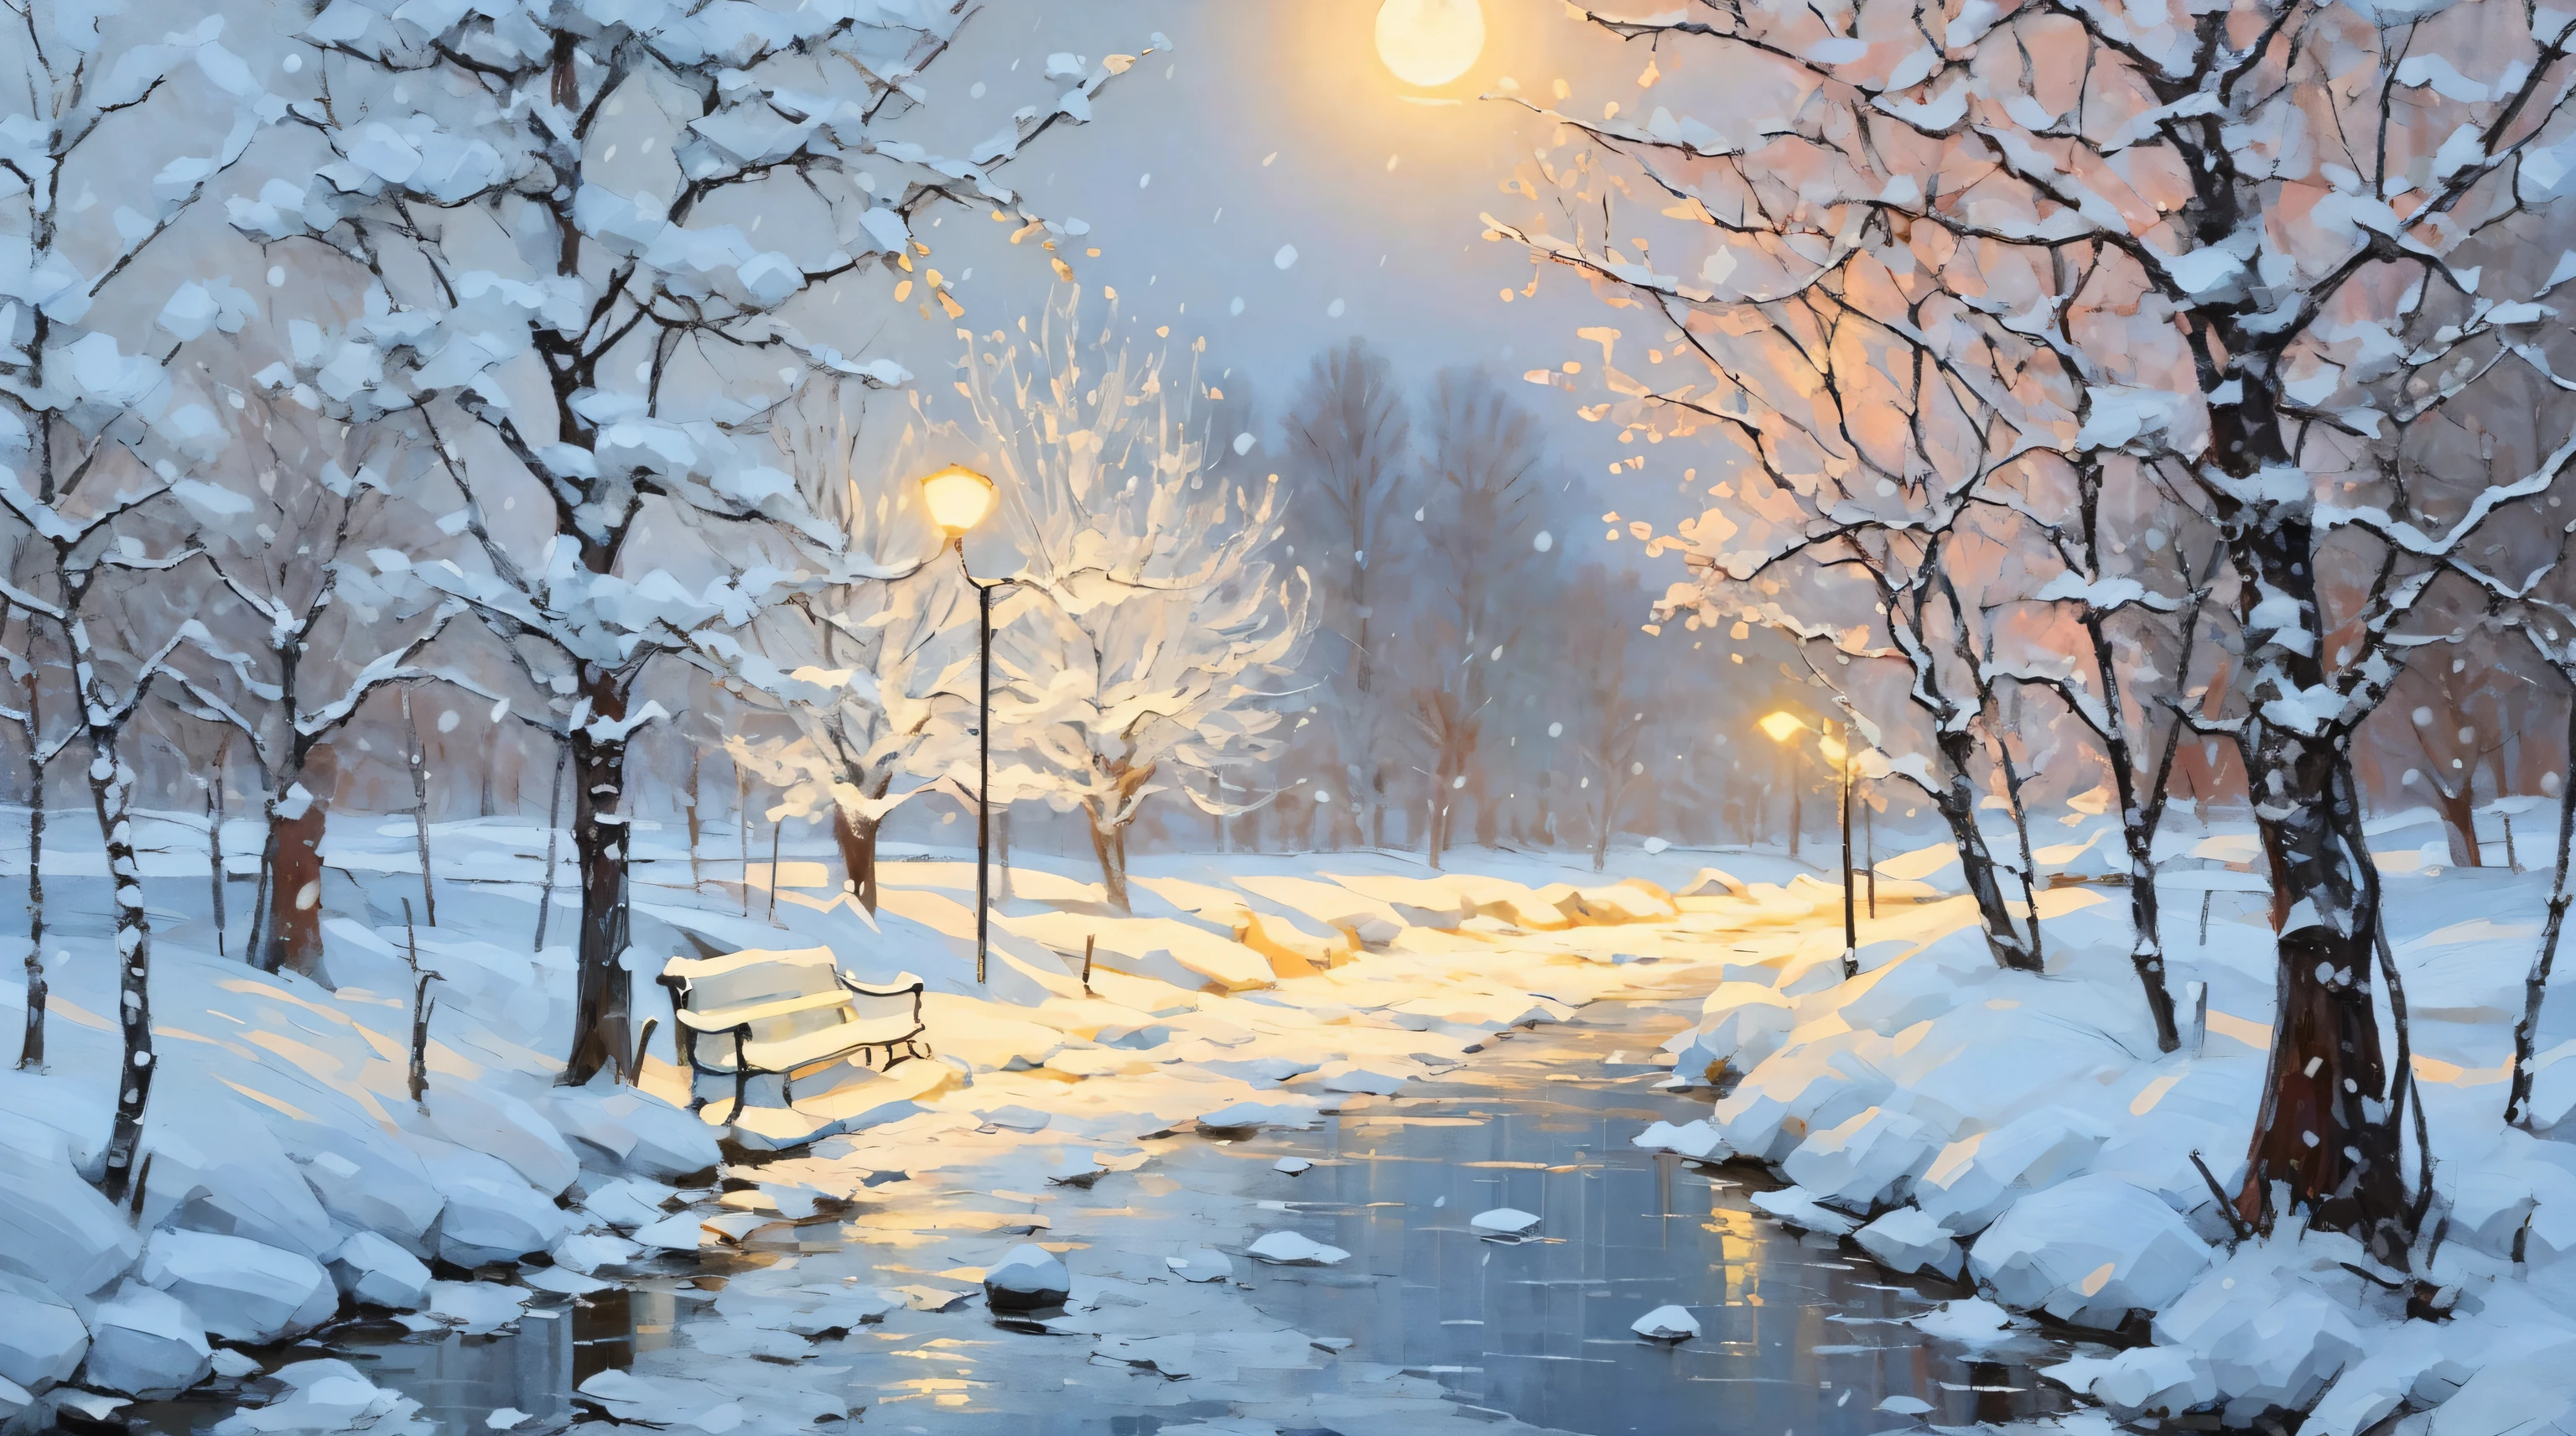 painting of a bench in a snowy park with a street light, winter painting, snowfall at night, painting of, inspired by Johann Berthelsen, by John Souch, by John Wollaston, in the winter, by John Gibson, by Jim Nelson, moonlight snowing, winter night, snowy night, in a snowy forest setting, winter in the snow